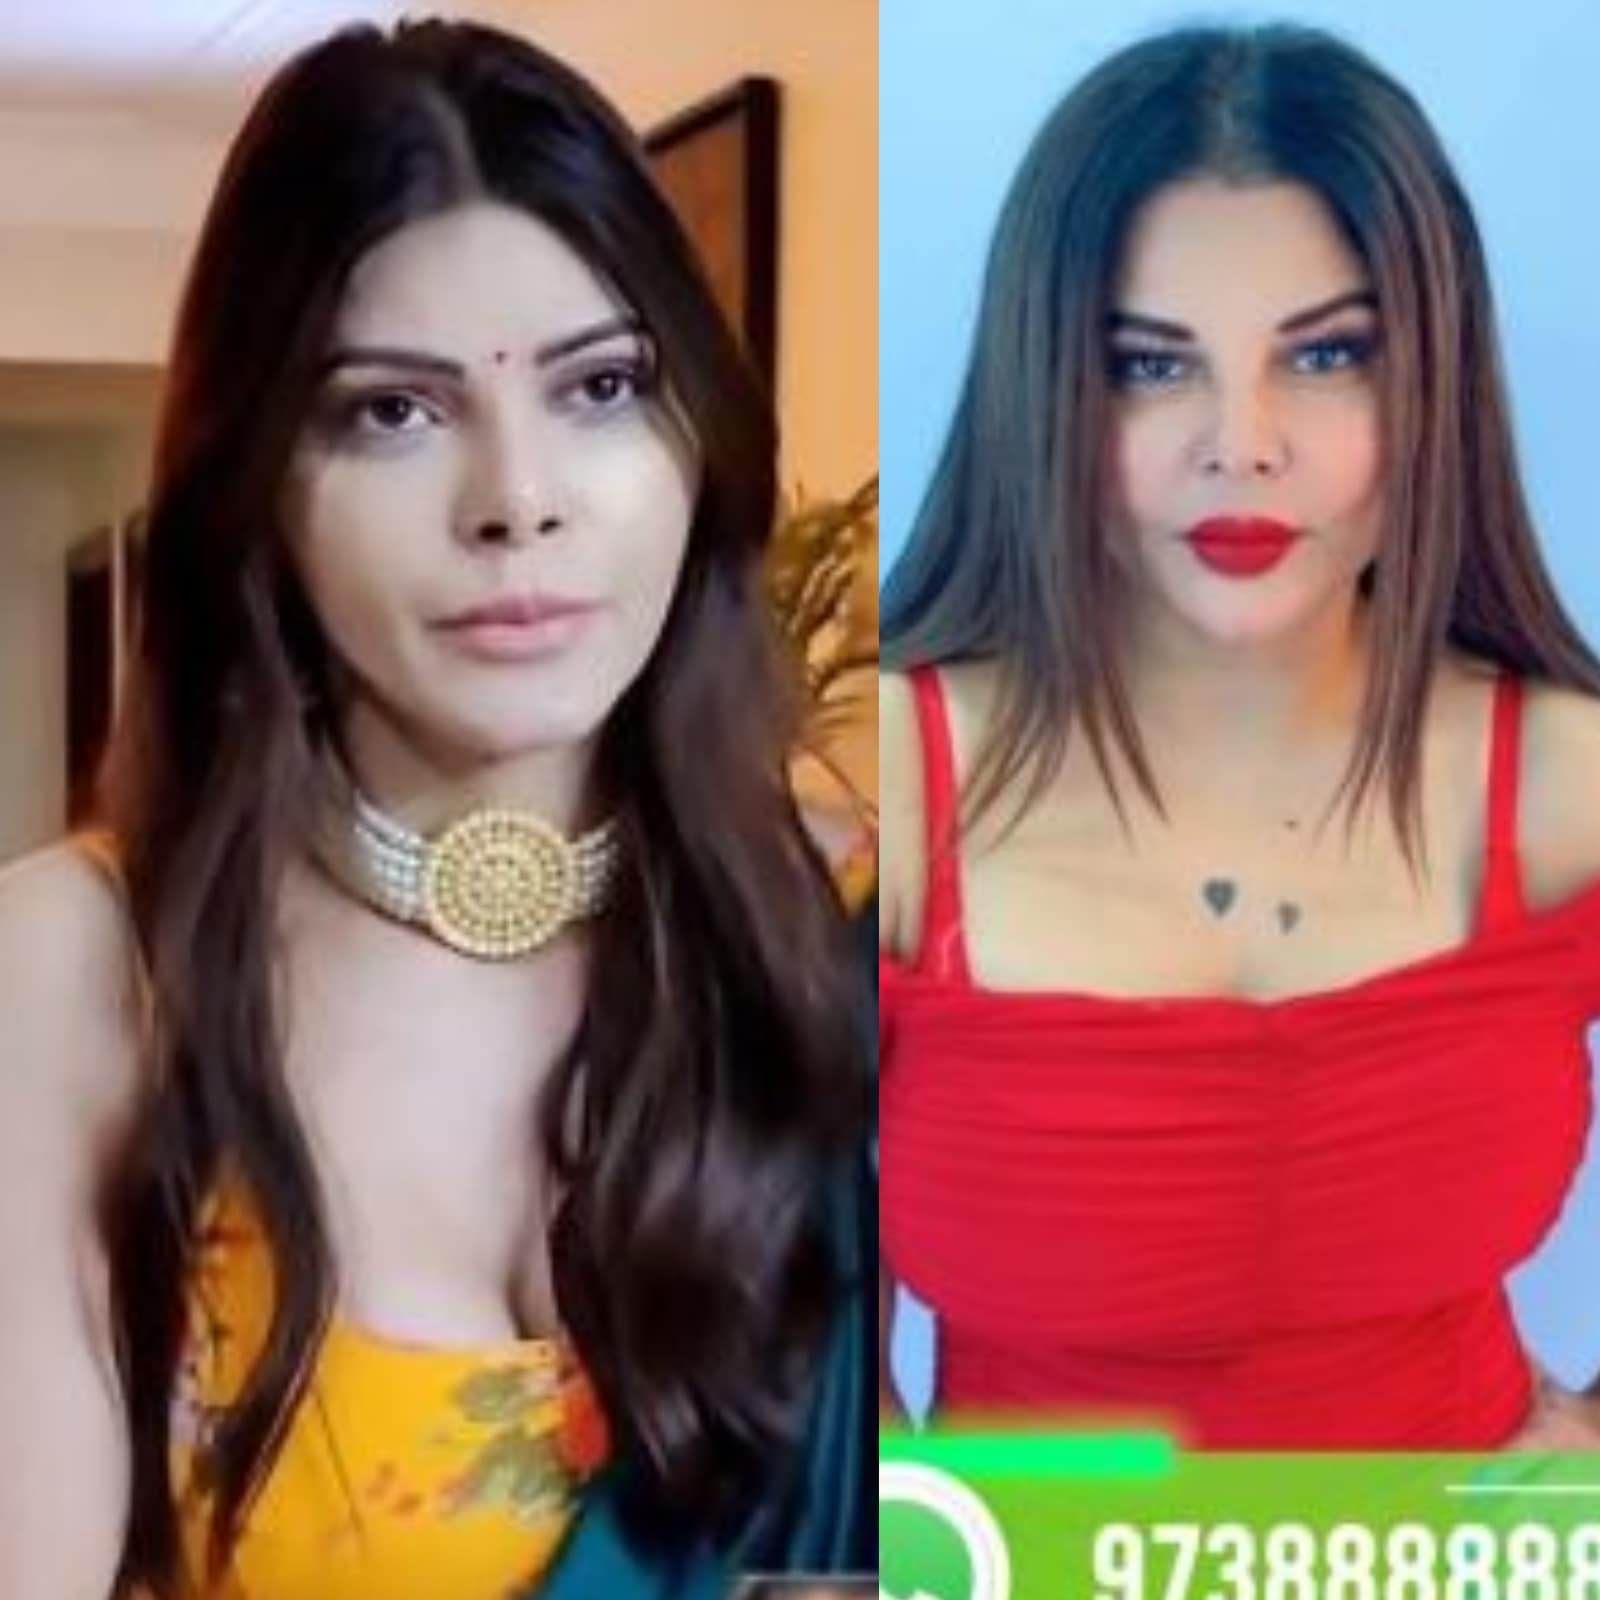 Rakhi Savant Sexi Video - Rakhi Sawant, Sherlyn Chopra File FIRs Against Each Other for Passing  'Objectionable' Remarks - News18